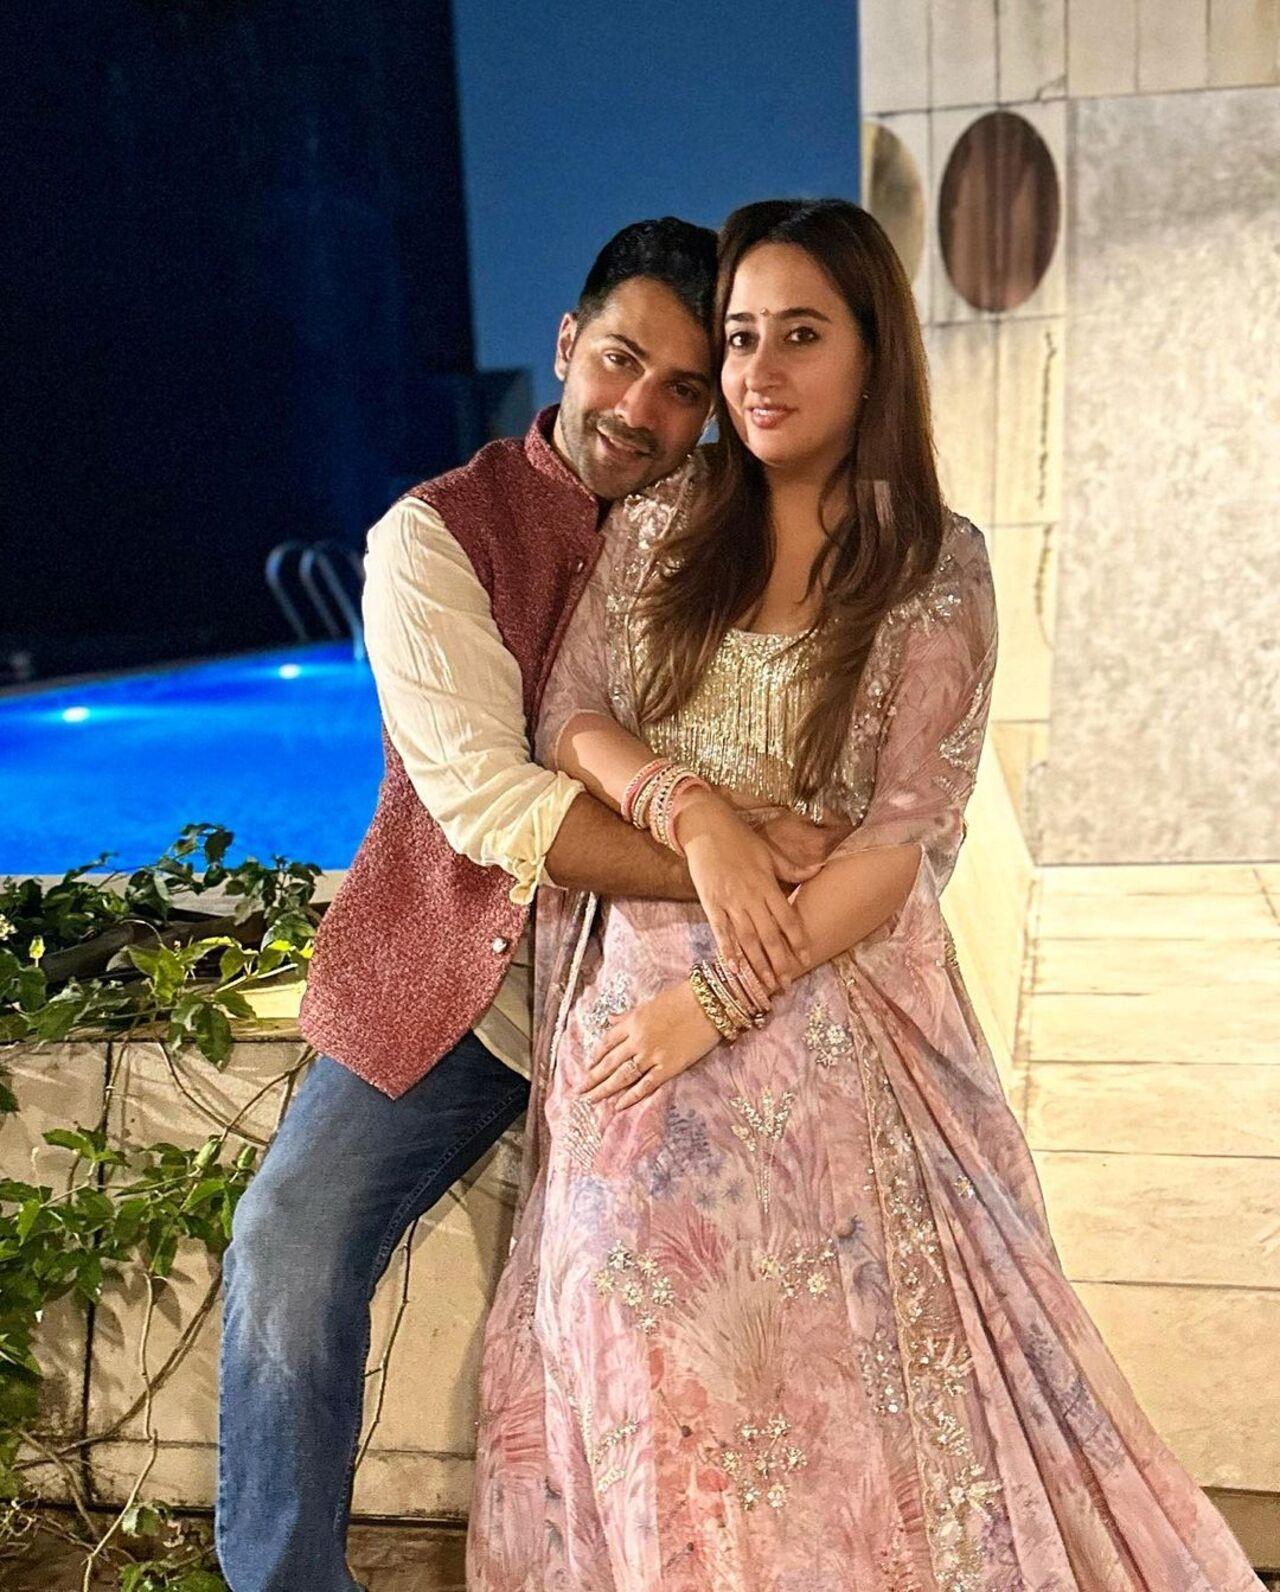 Varun Dhawan and Natasha Dalal dated for several years before they tied the knot in 2021